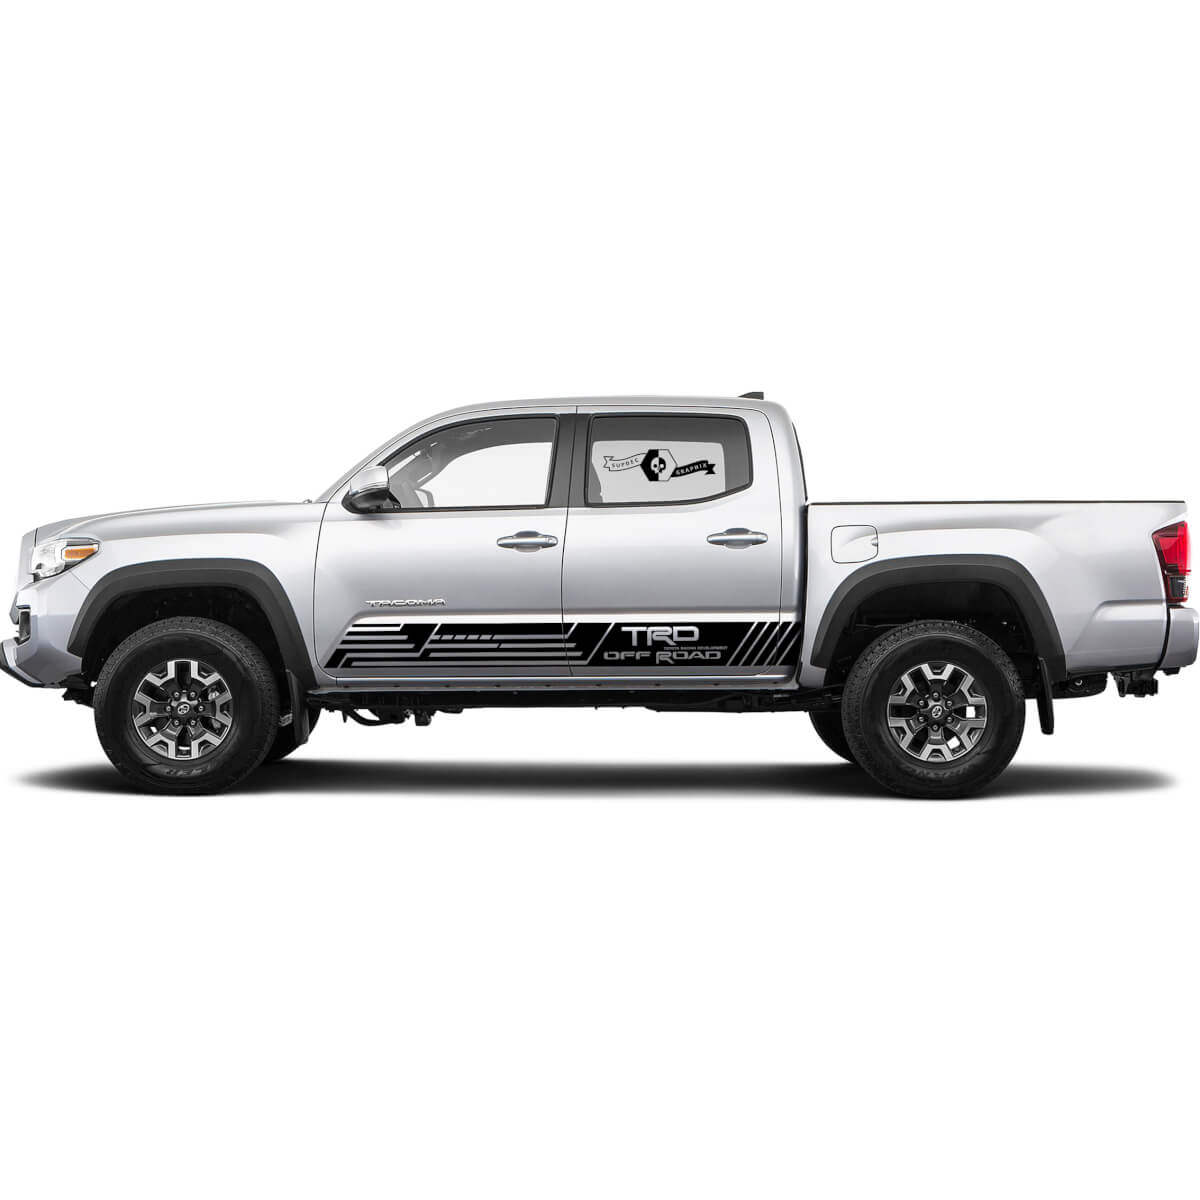 TRD Toyota Racing Style for Rocker Panel Decals Stickers for Tacoma FJ Cruiser Tundra Hilux 4Runner 2